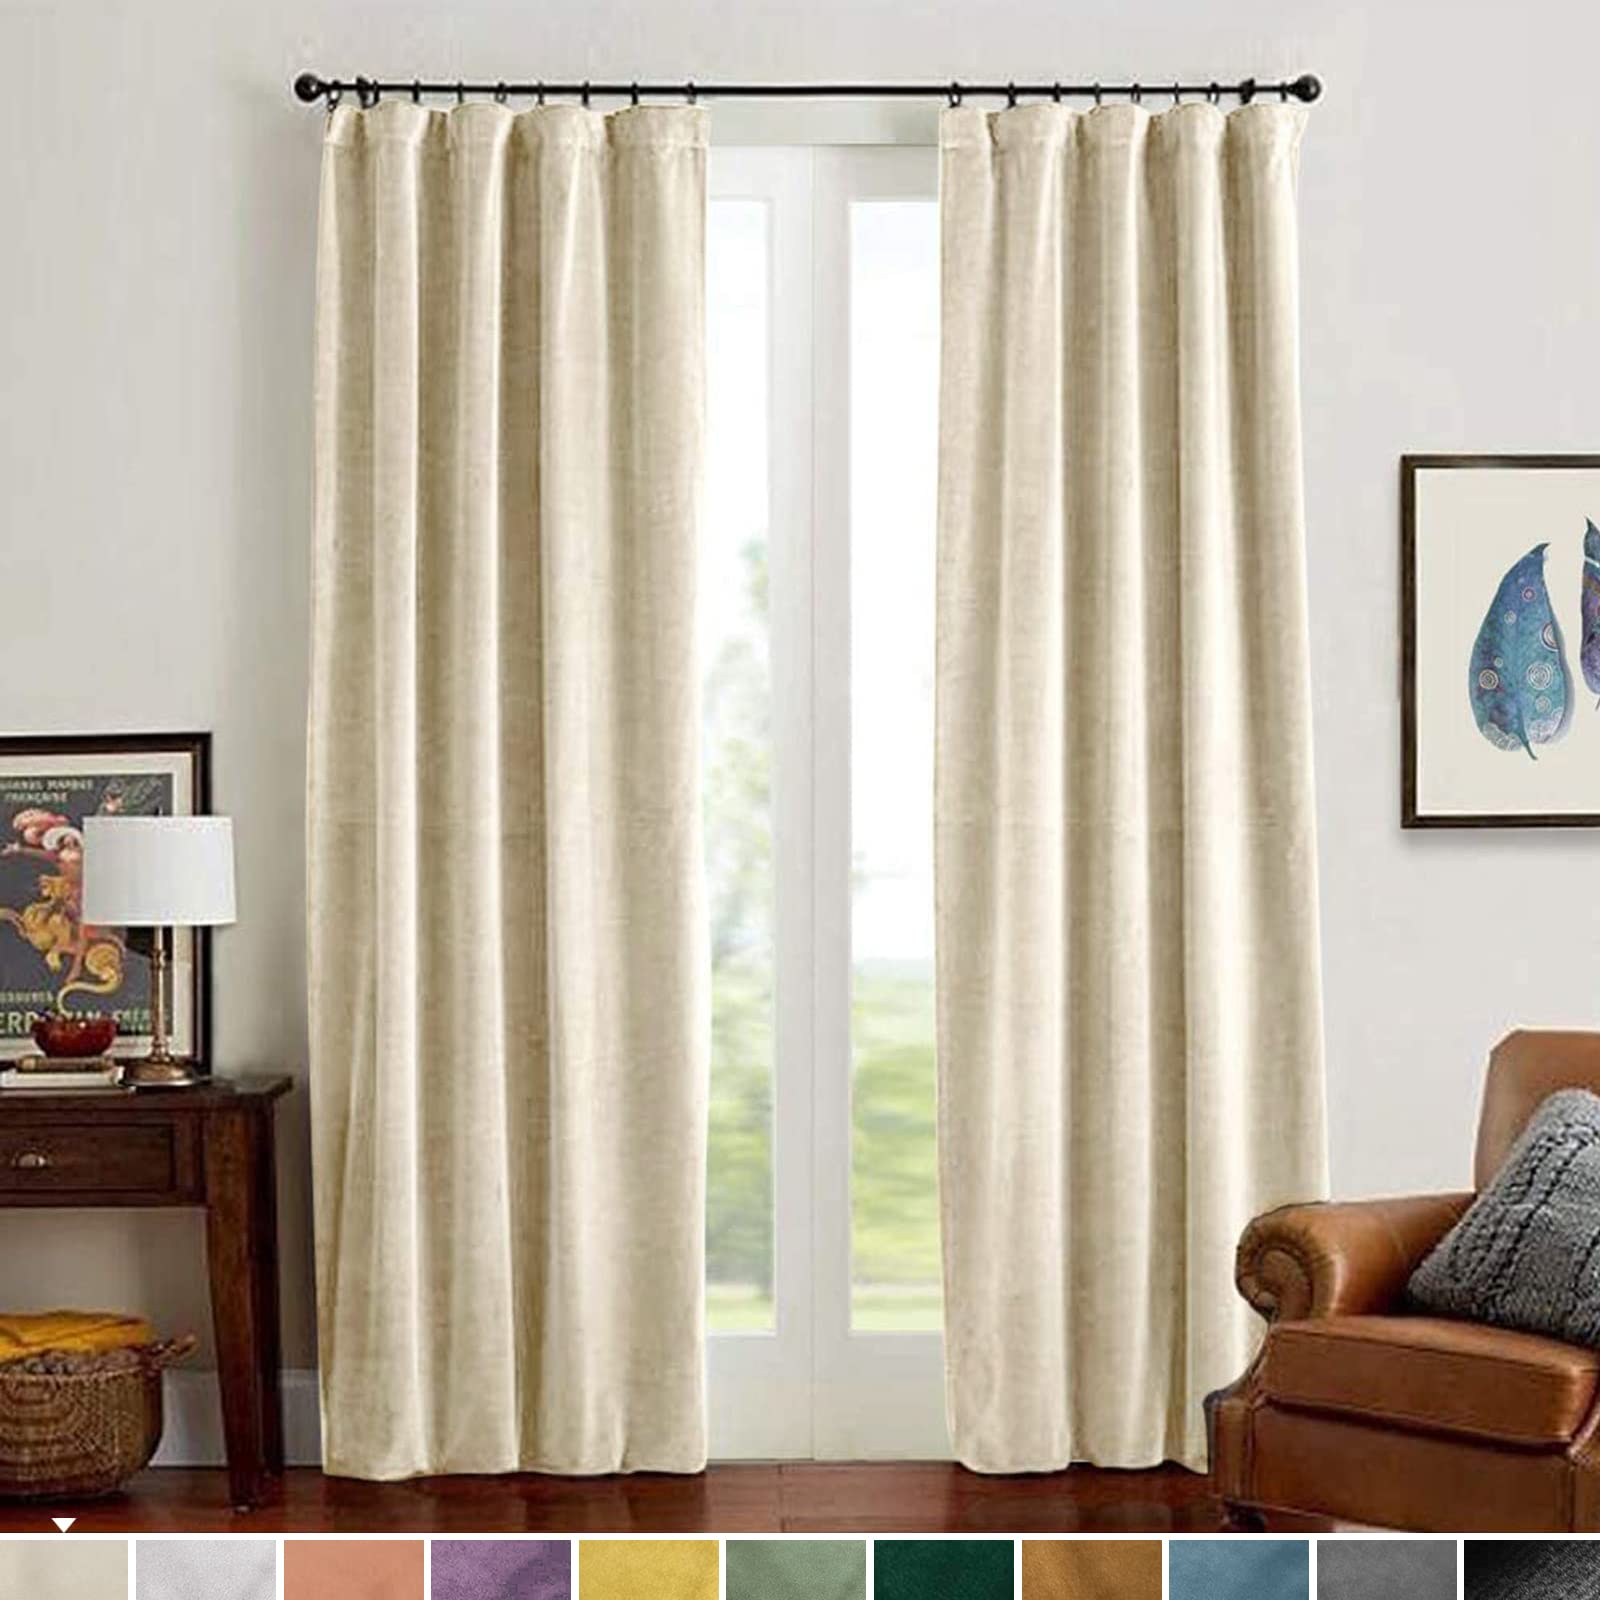 Lazzzy Velvet curtain Panels Beige Thermal Insulated Rod Pocket Super Soft Luxury Drapes Home Decor Living Room for Bedroom Wind